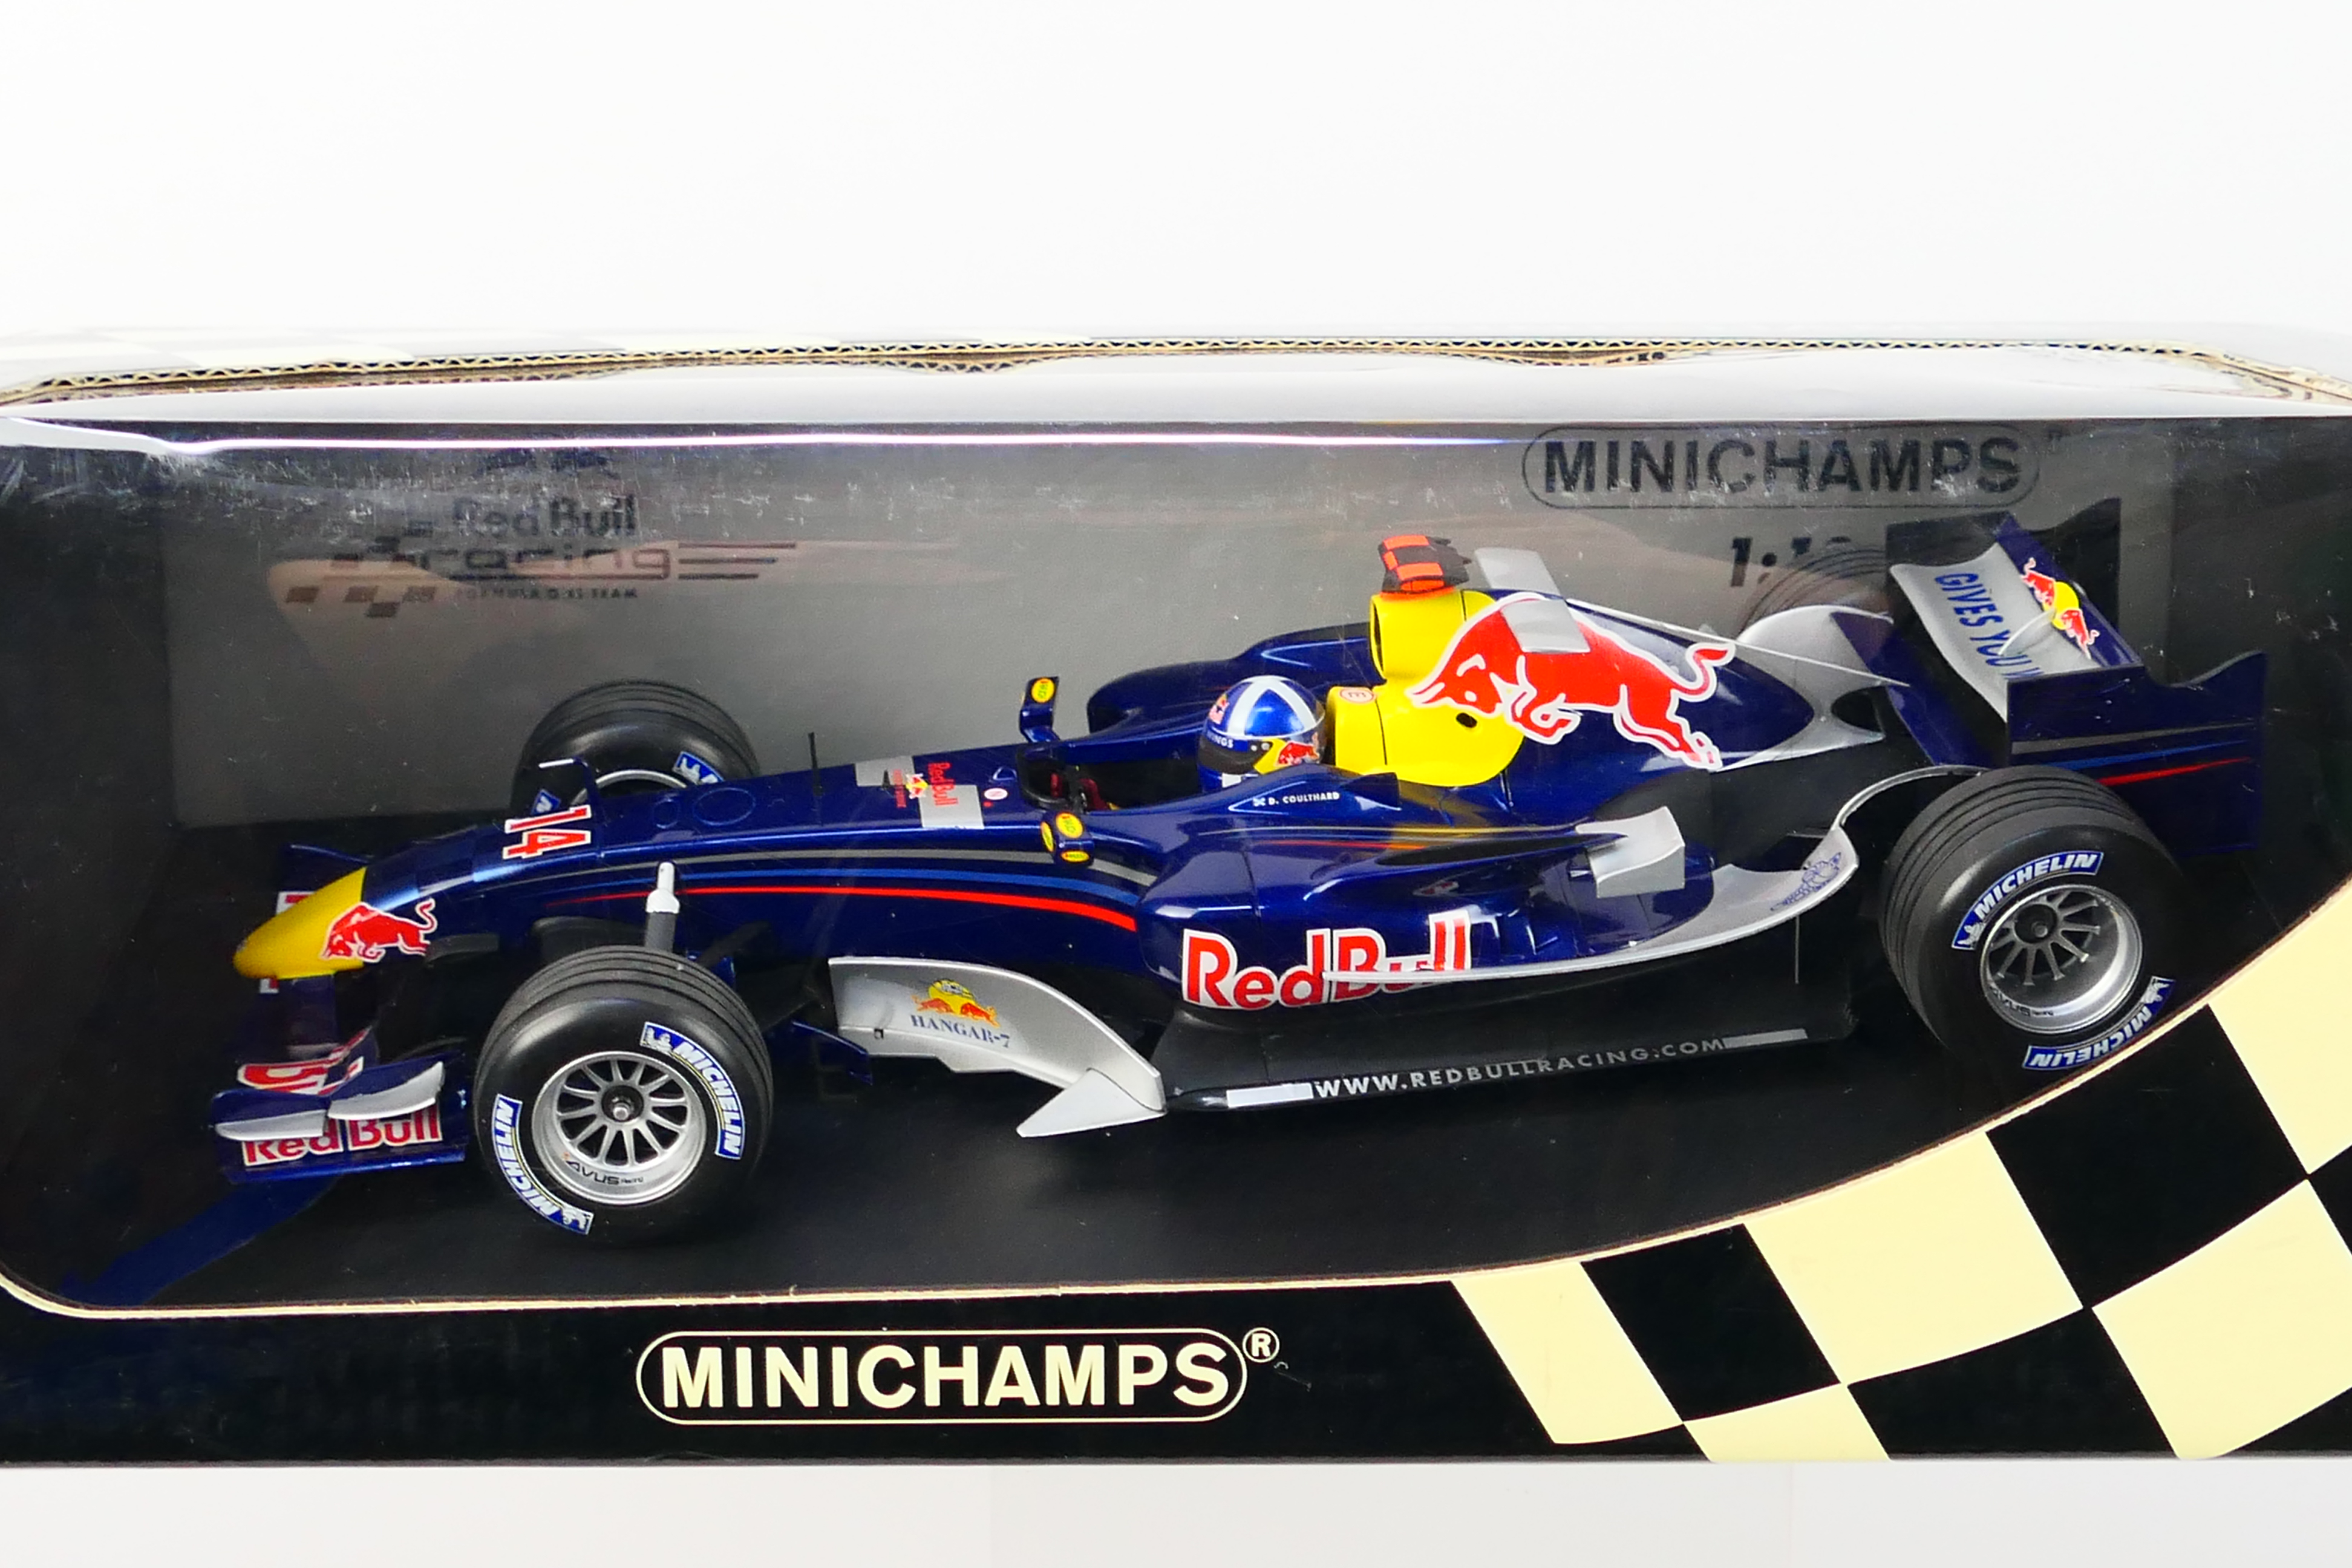 Minichamps- A boxed 1:18 scale Red Bull Racing RB2 David Coulthard 2006 car which appears Mint in a - Bild 2 aus 3